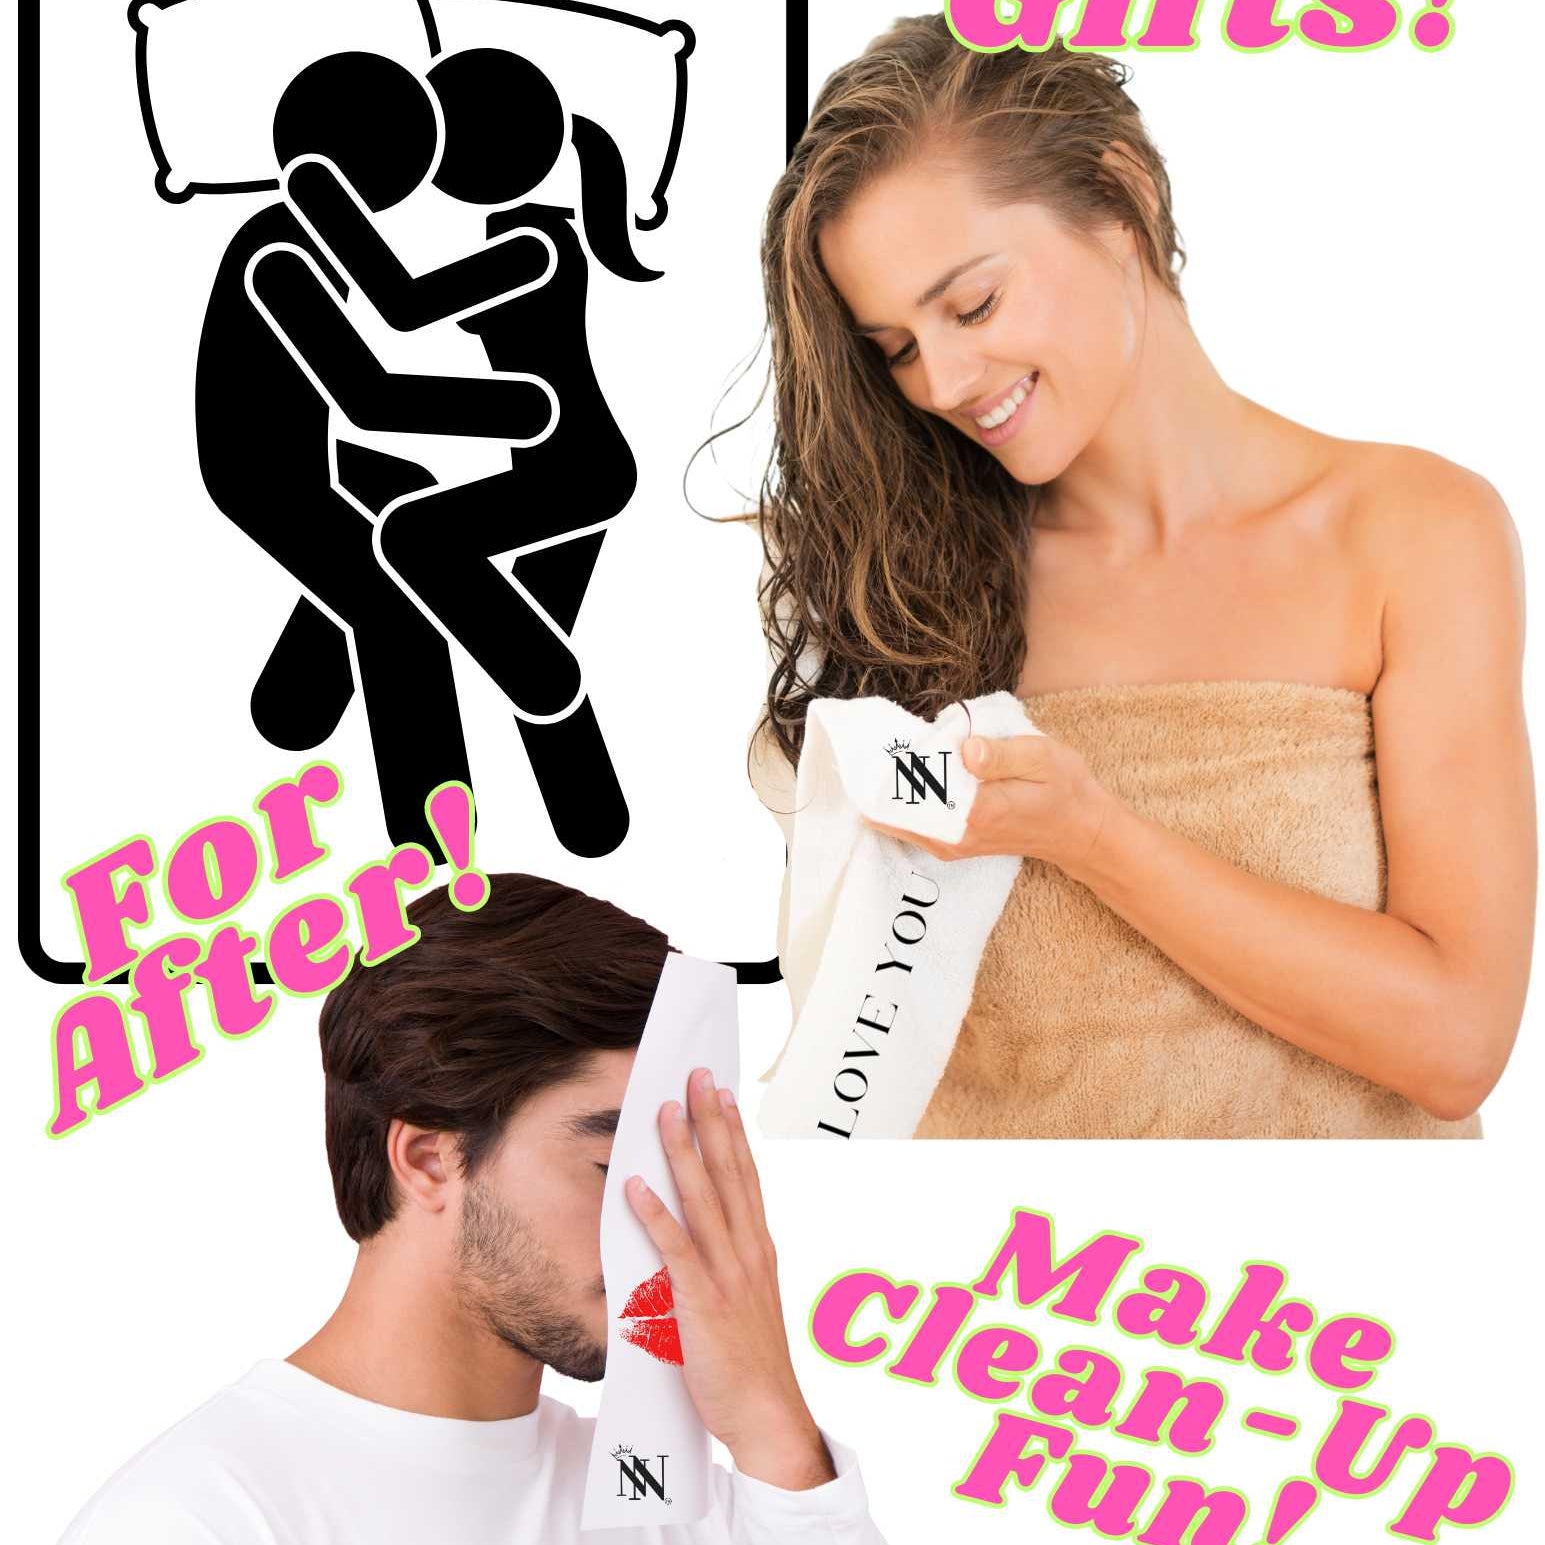 Make after sex cleanup fun with nectar napkins after sex towels